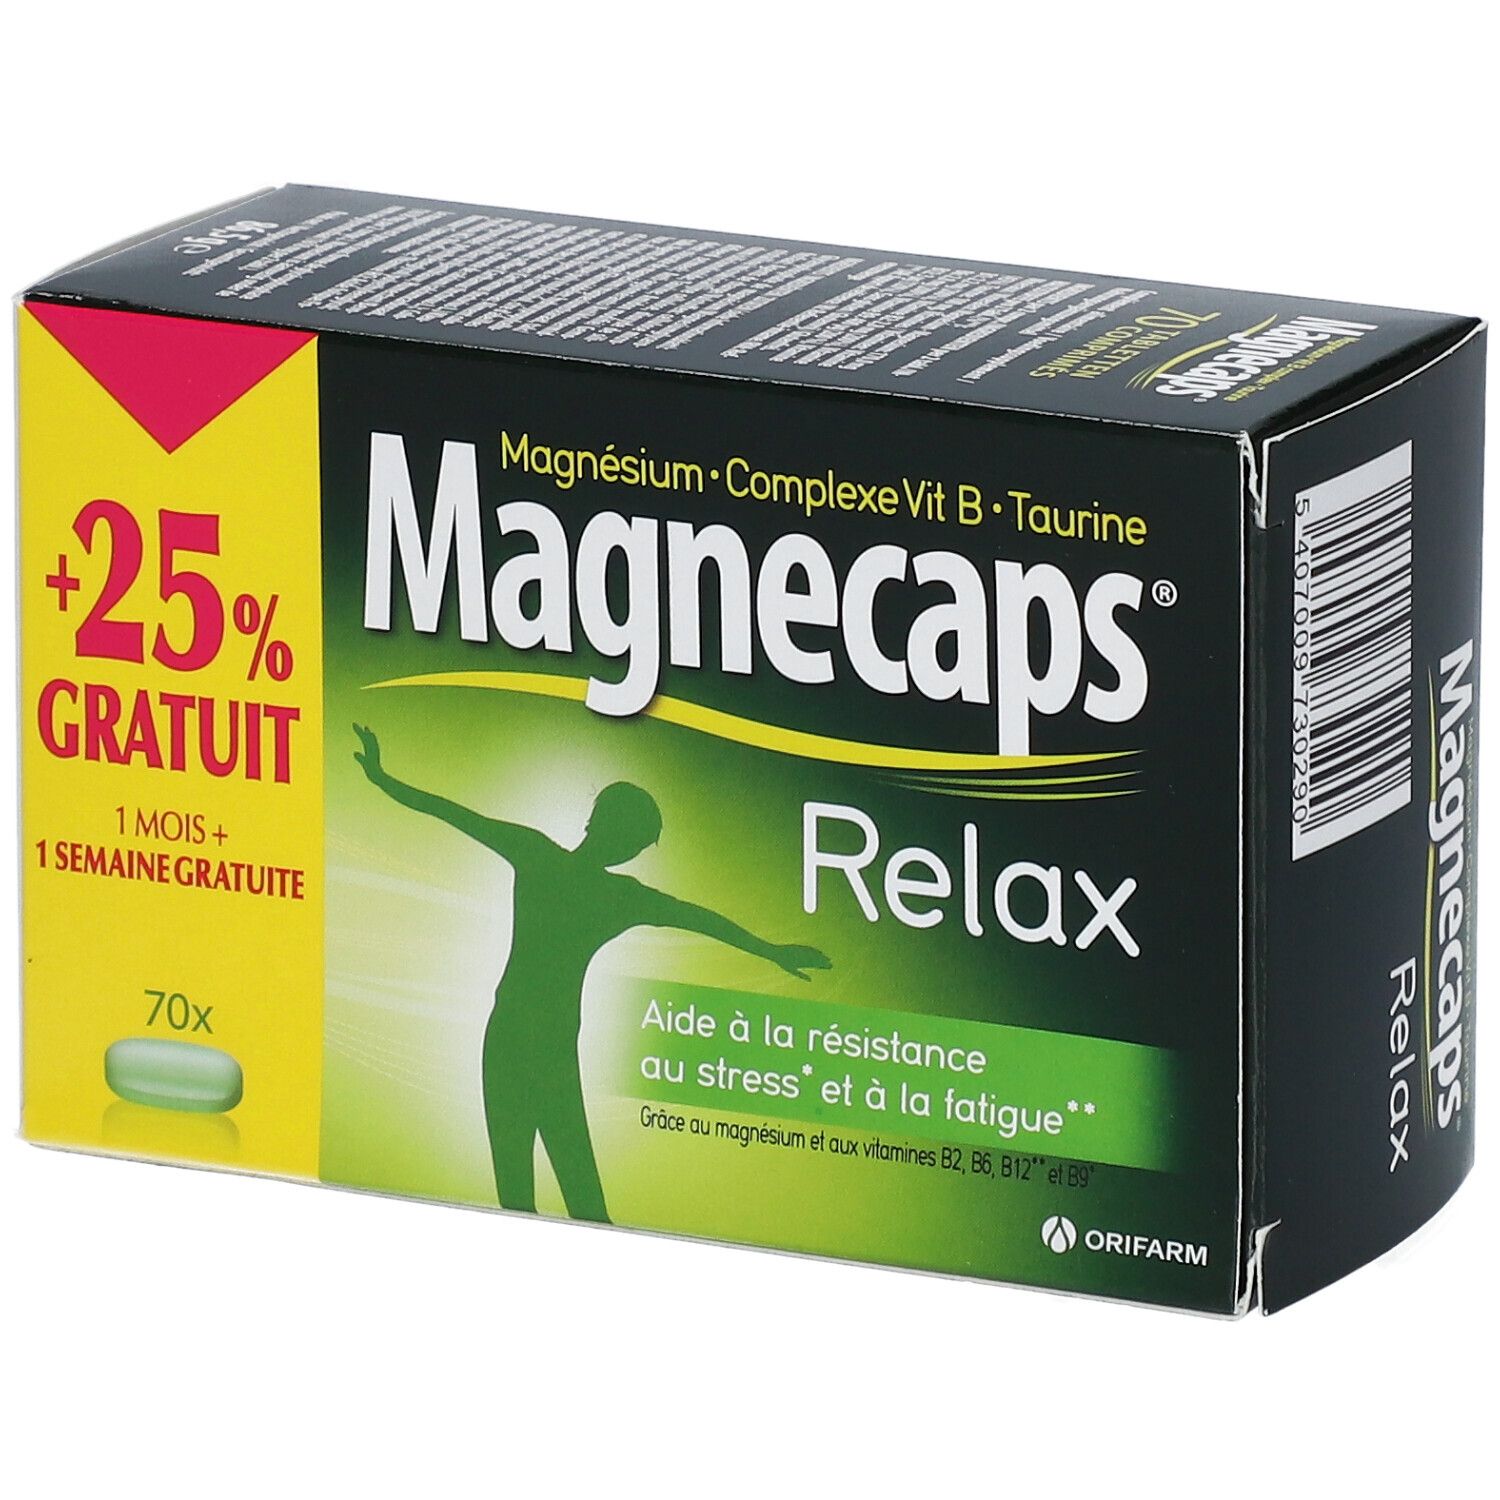 Magnecaps® Relax